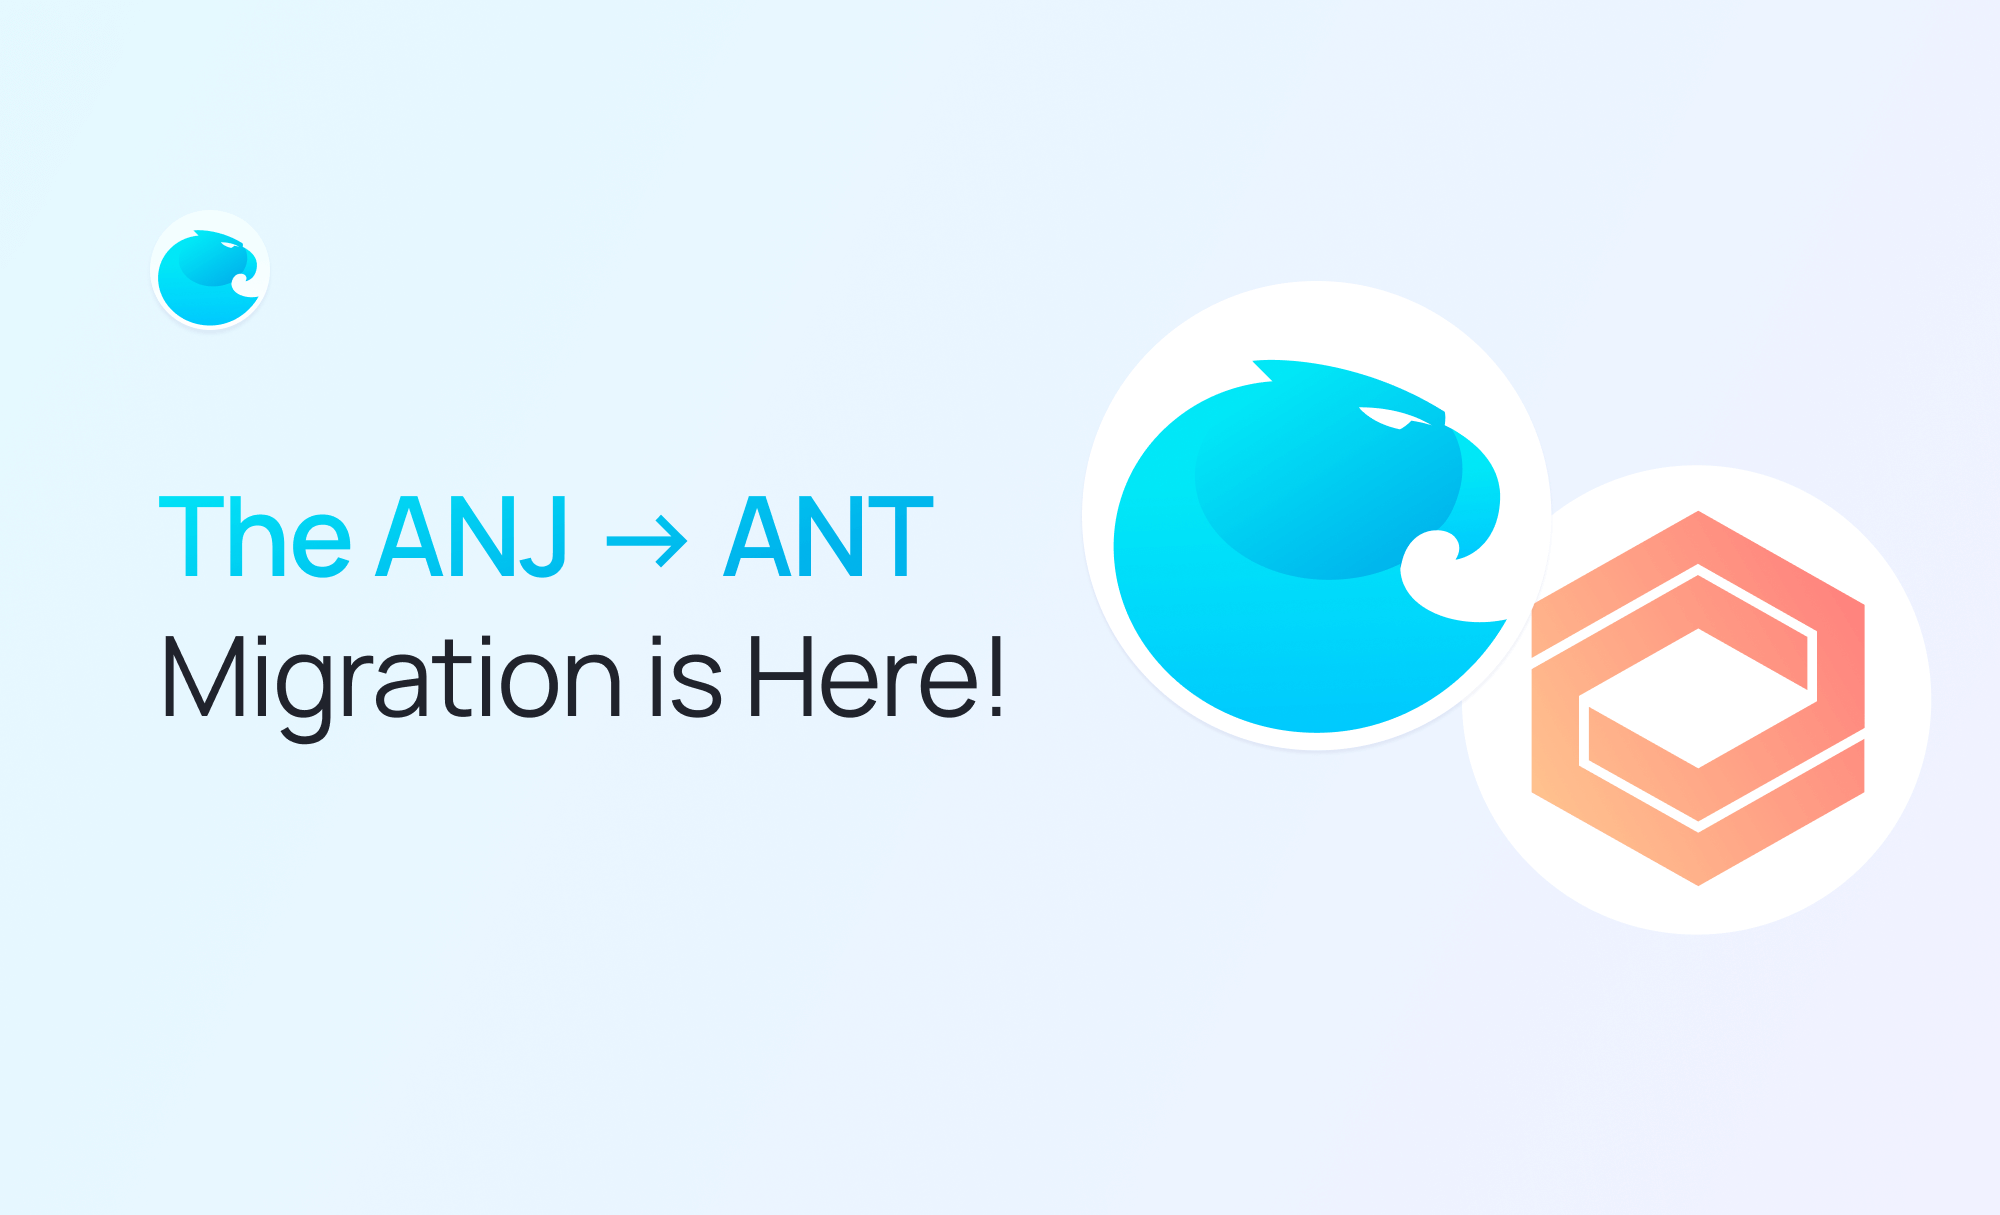 The $ANJ → $ANT Migration is Here!